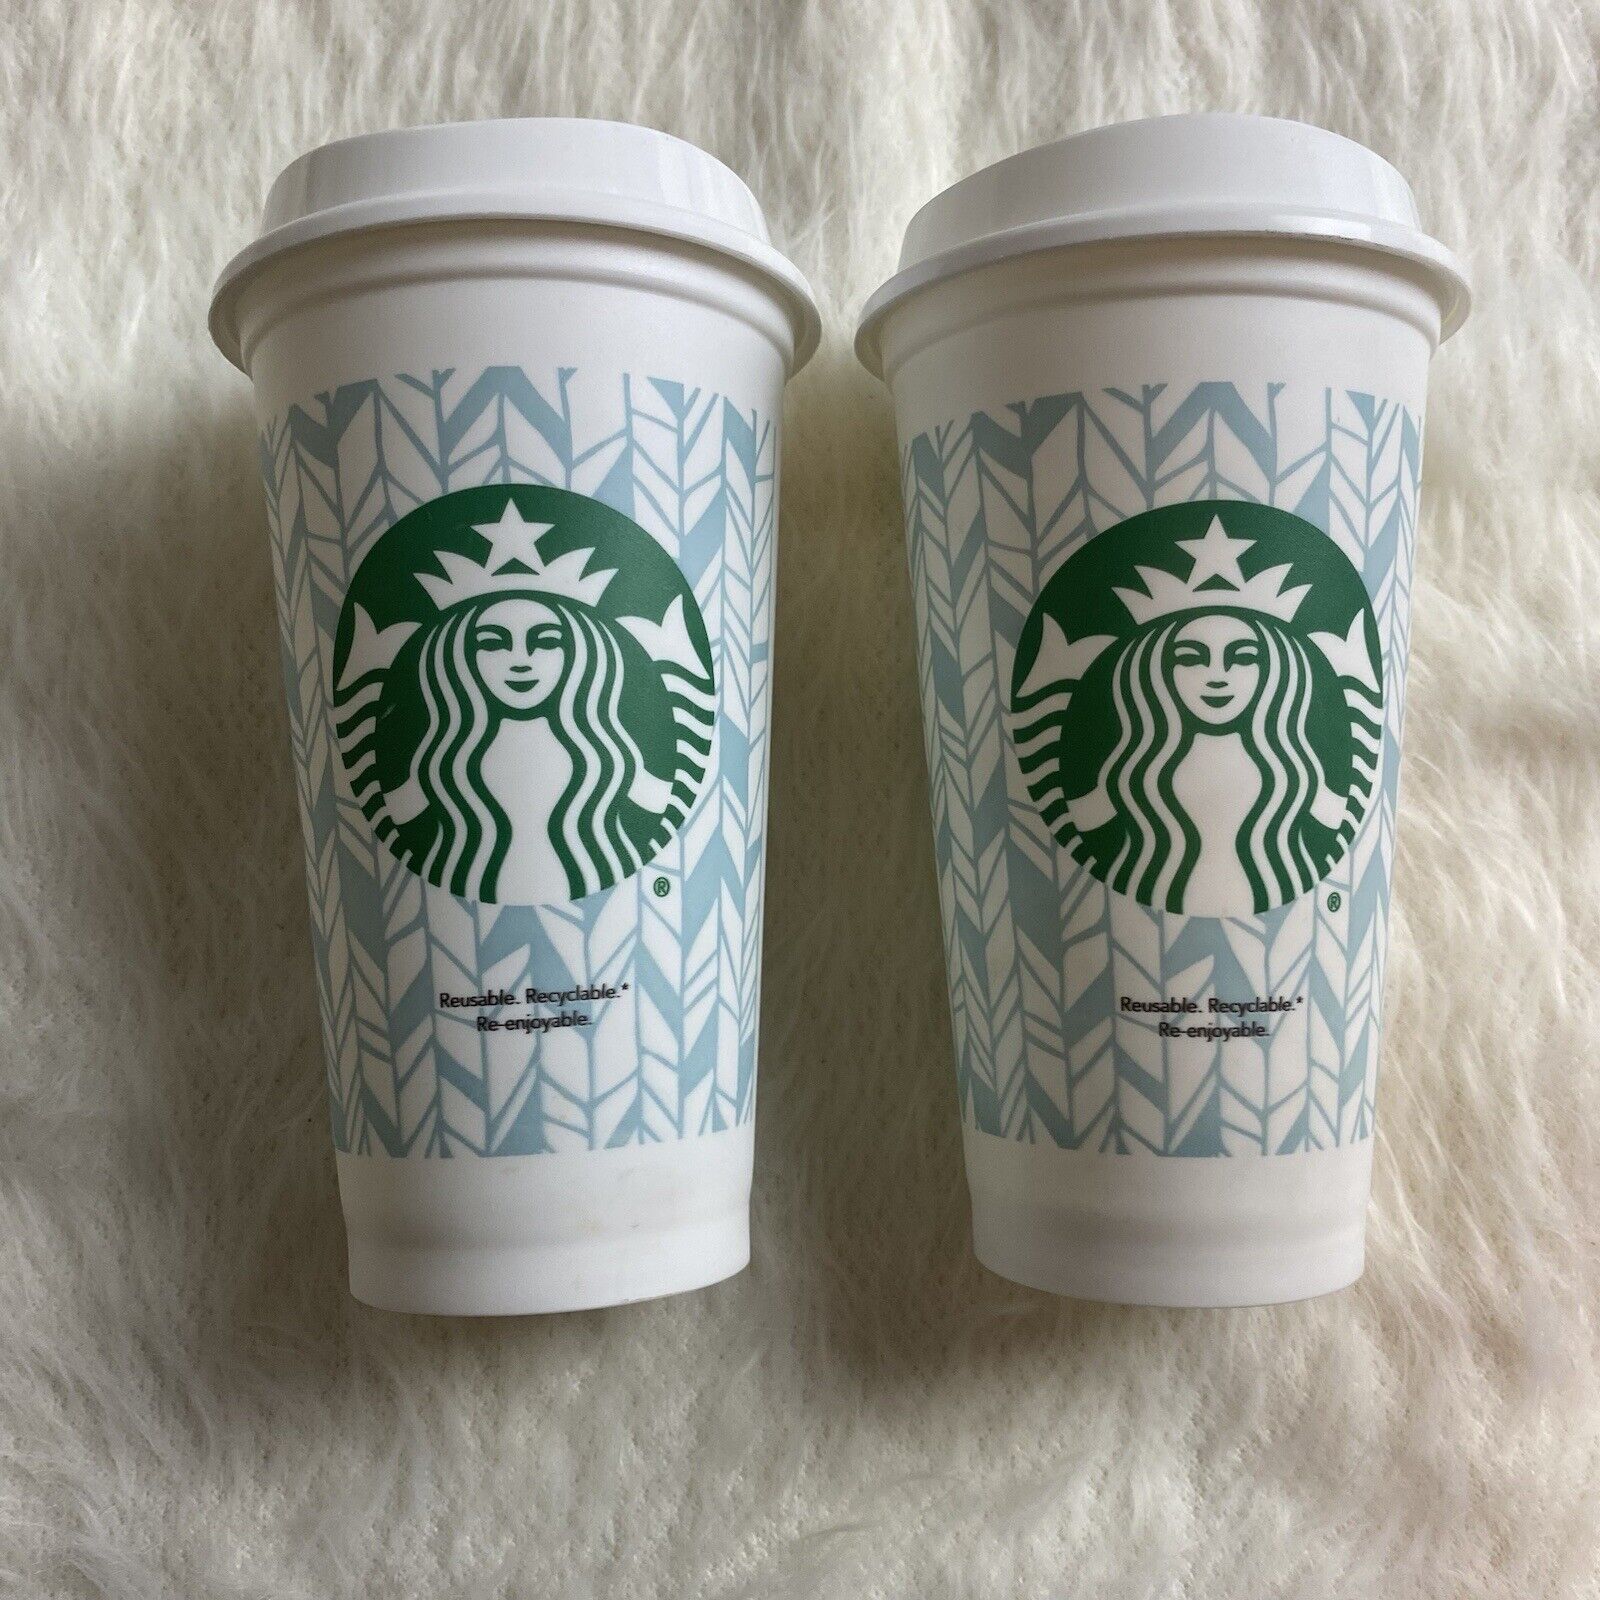 Starbucks 2012 Reusable Travel Cups with Lids Limited Edition Chevron Grande